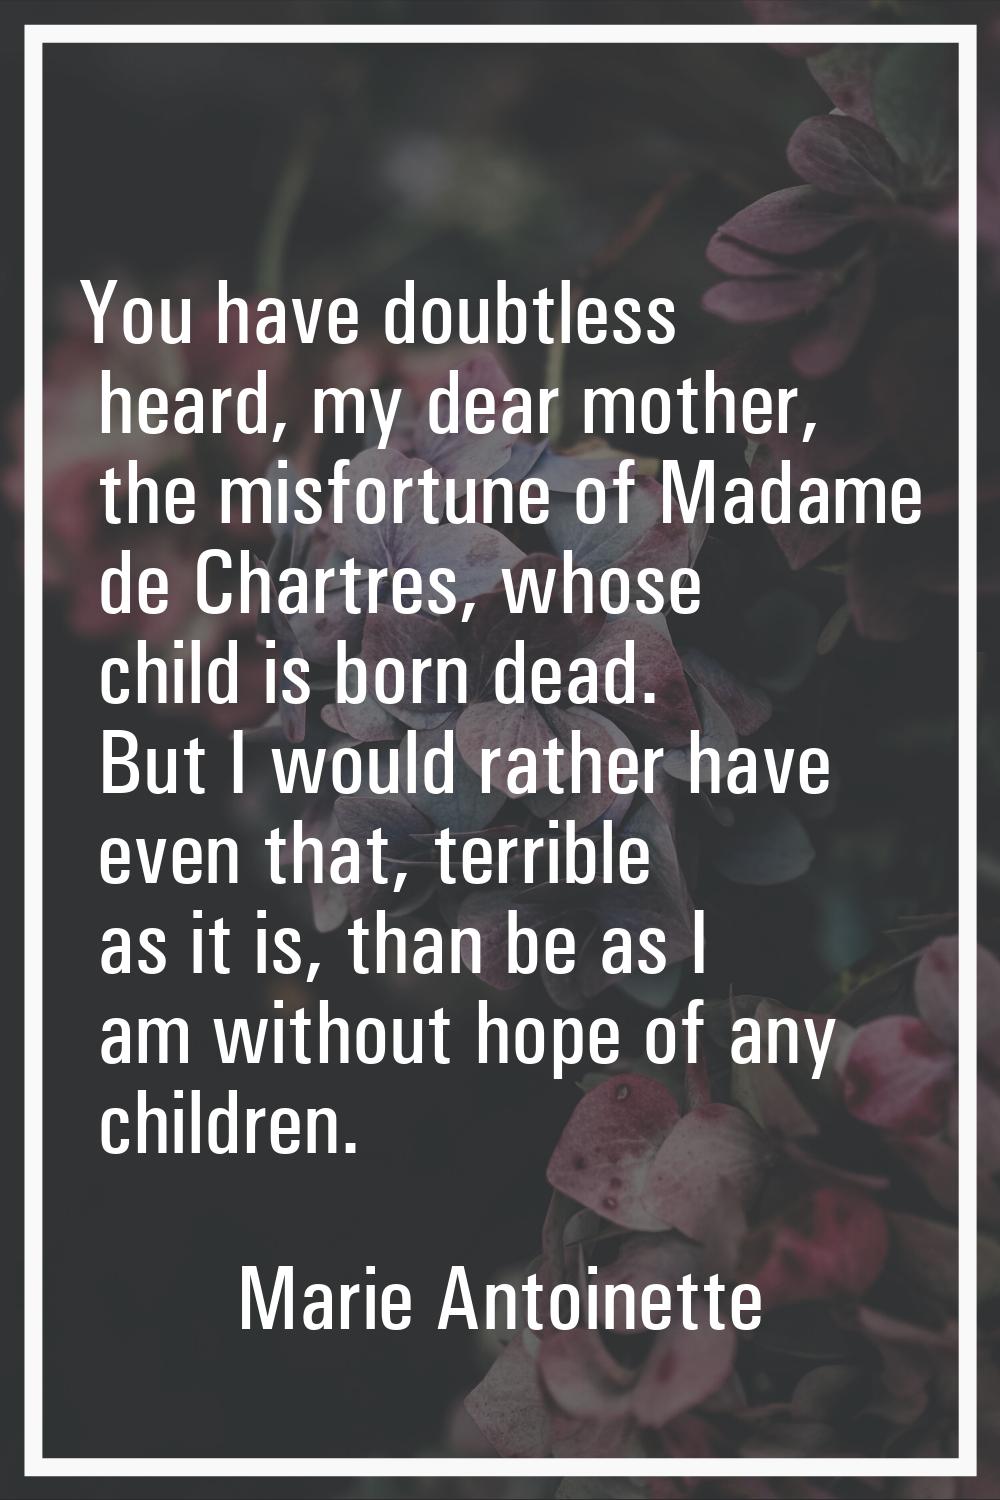 You have doubtless heard, my dear mother, the misfortune of Madame de Chartres, whose child is born